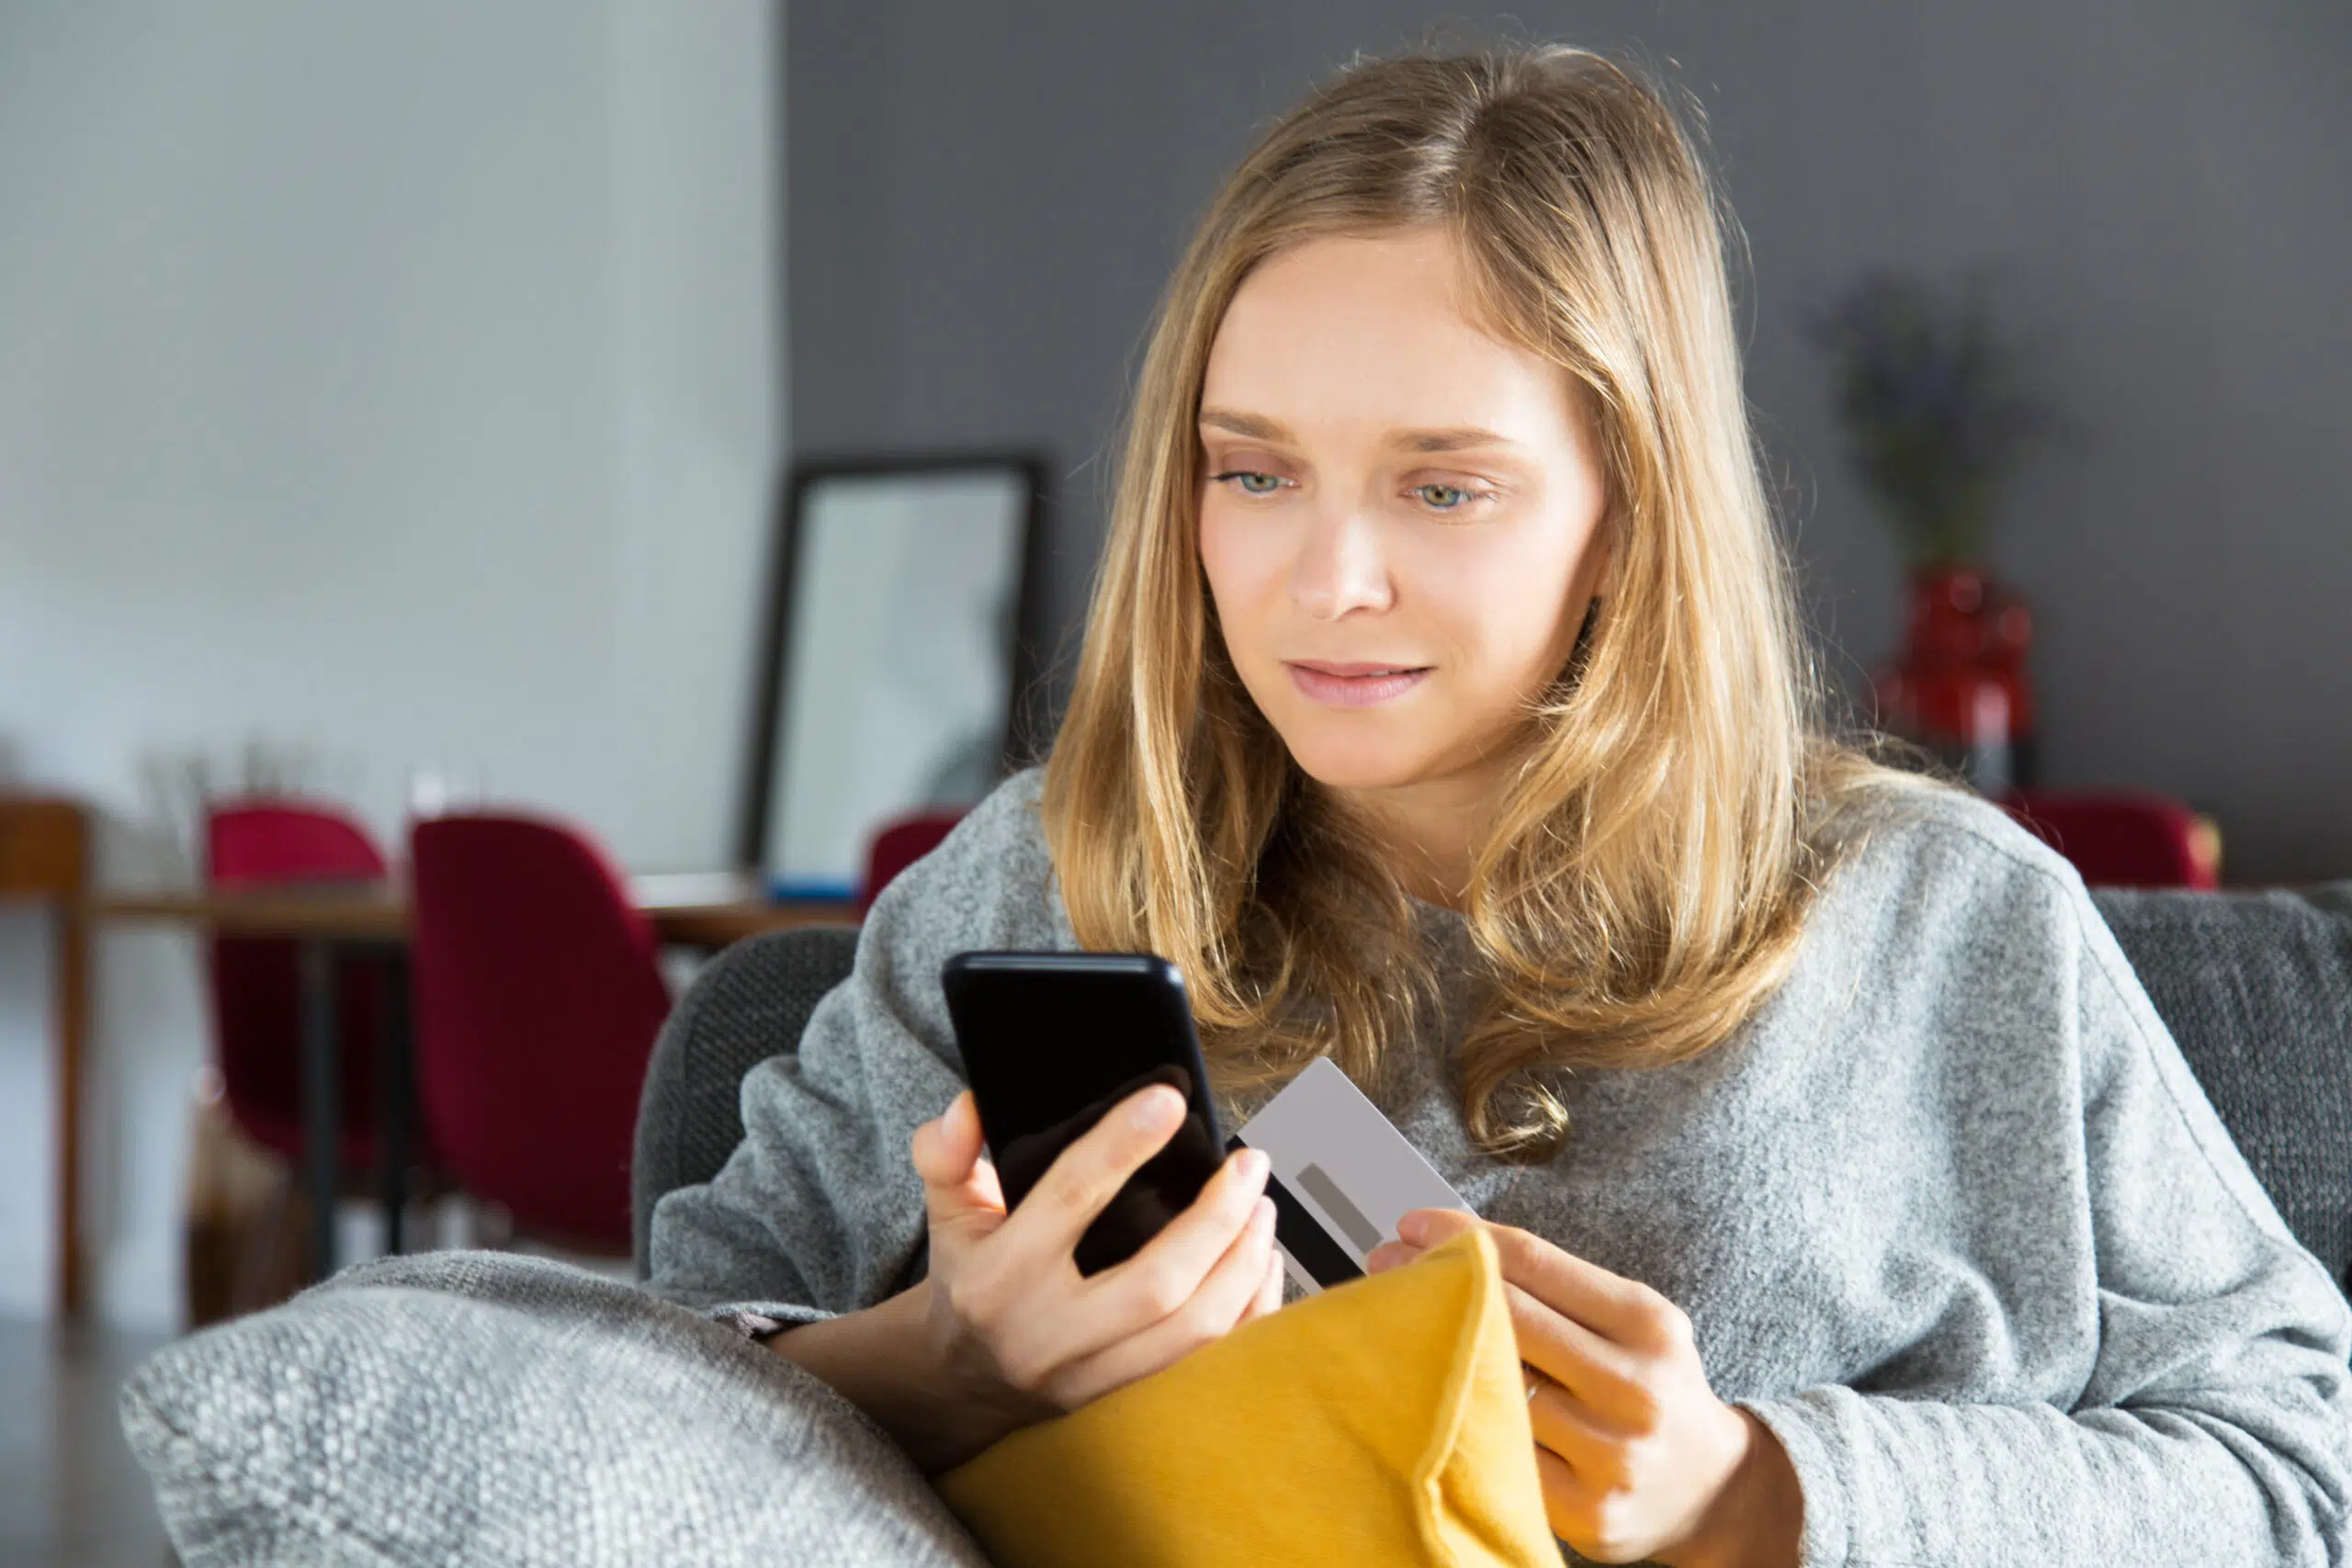 woman looks confused while purchasing online using her phone